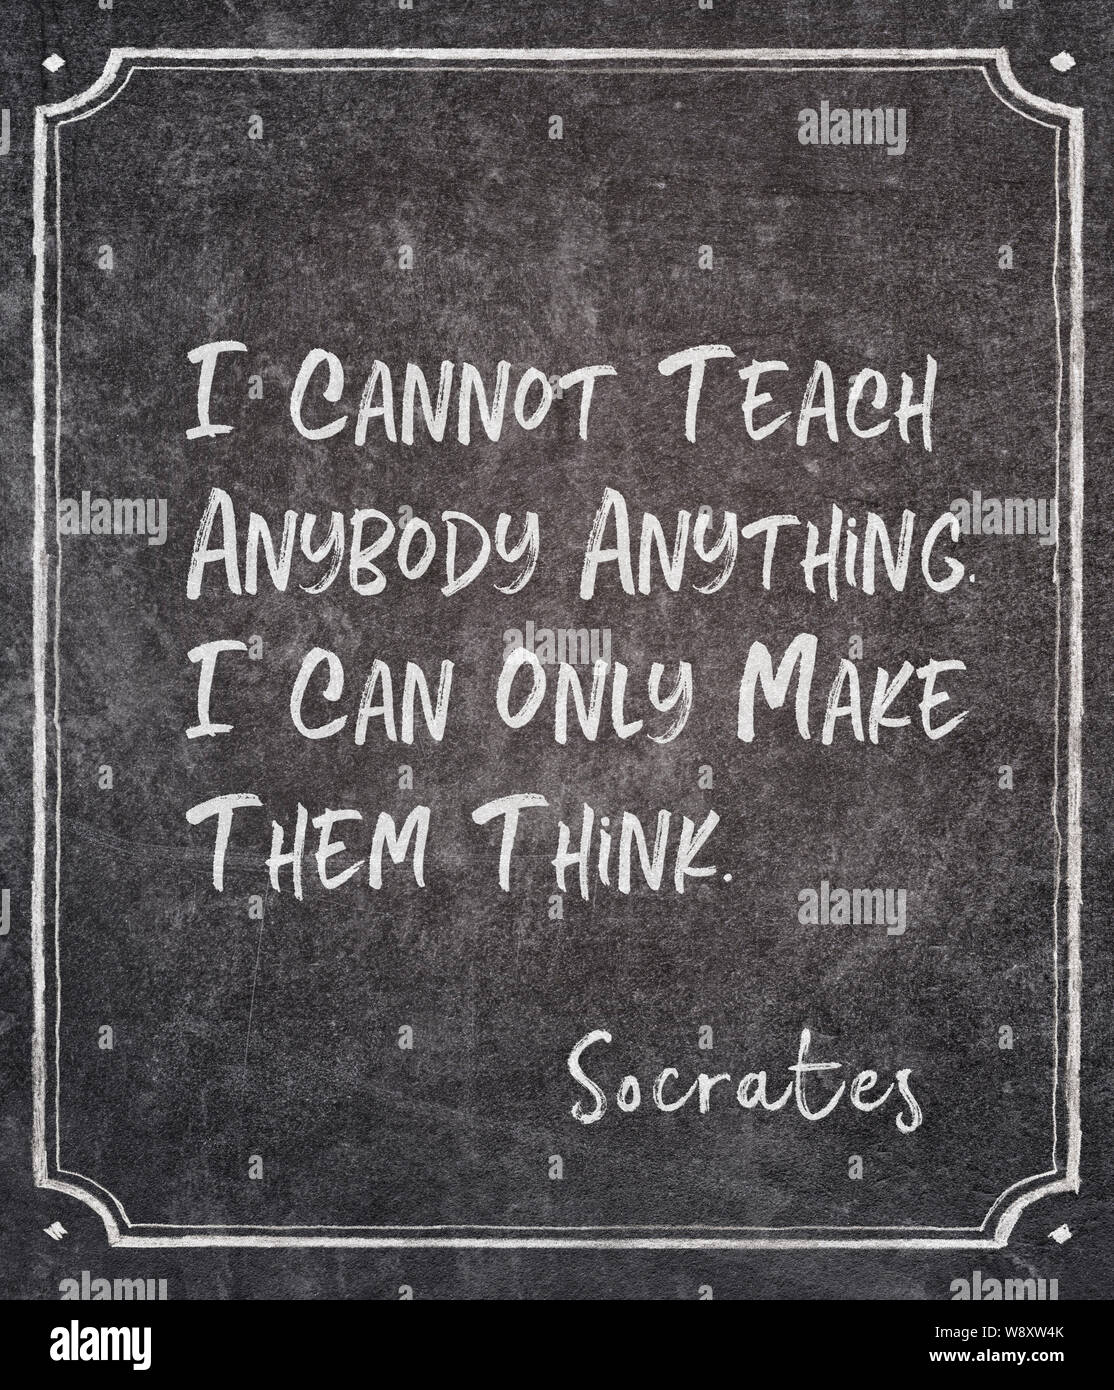 I cannot teach anybody anything. I can only make them think - ancient Greek philosopher Socrates quote written on framed chalkboard Stock Photo